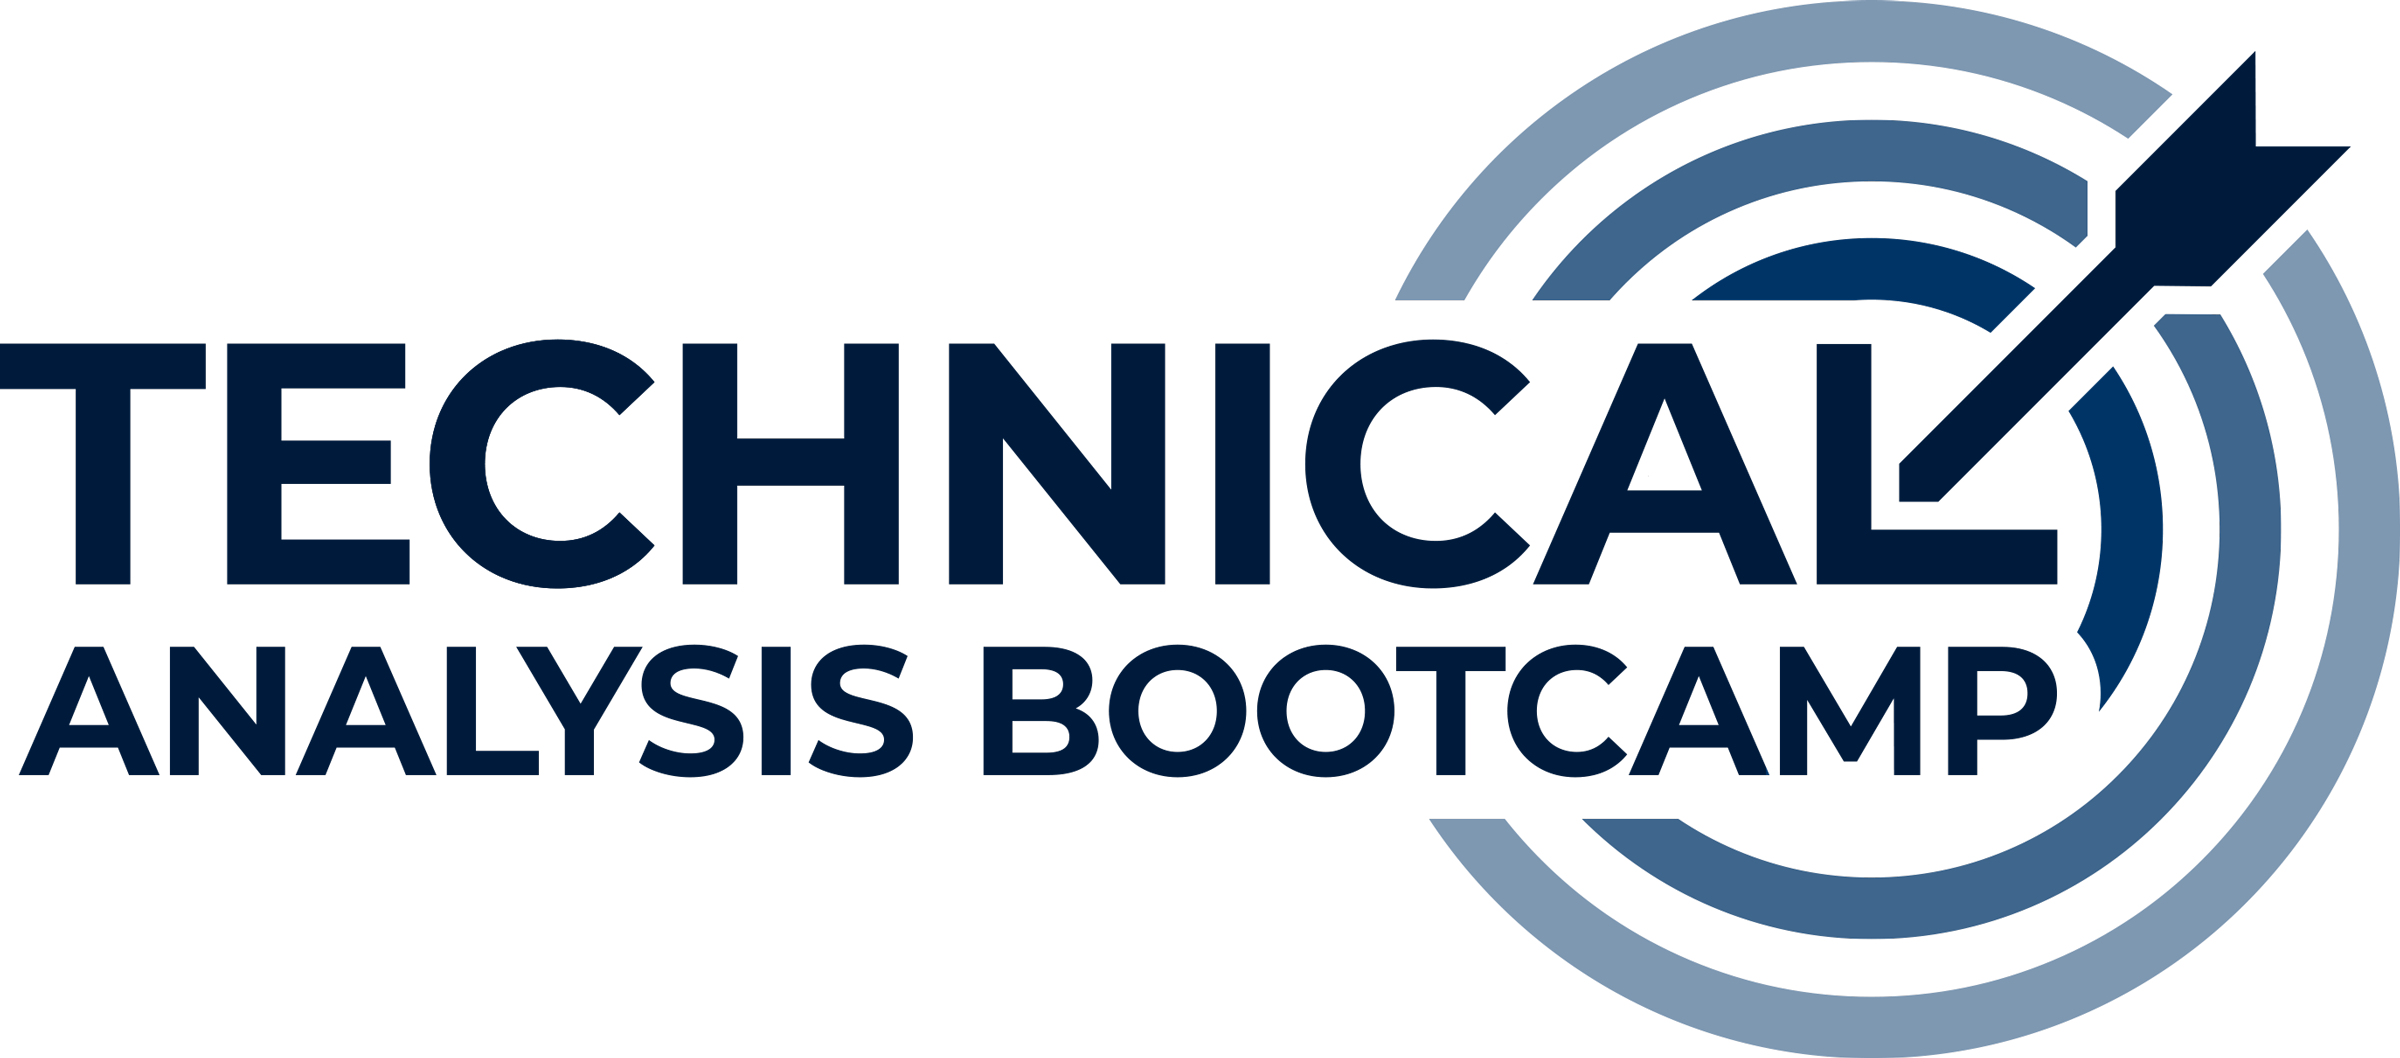 Technical Analysis Bootcamp